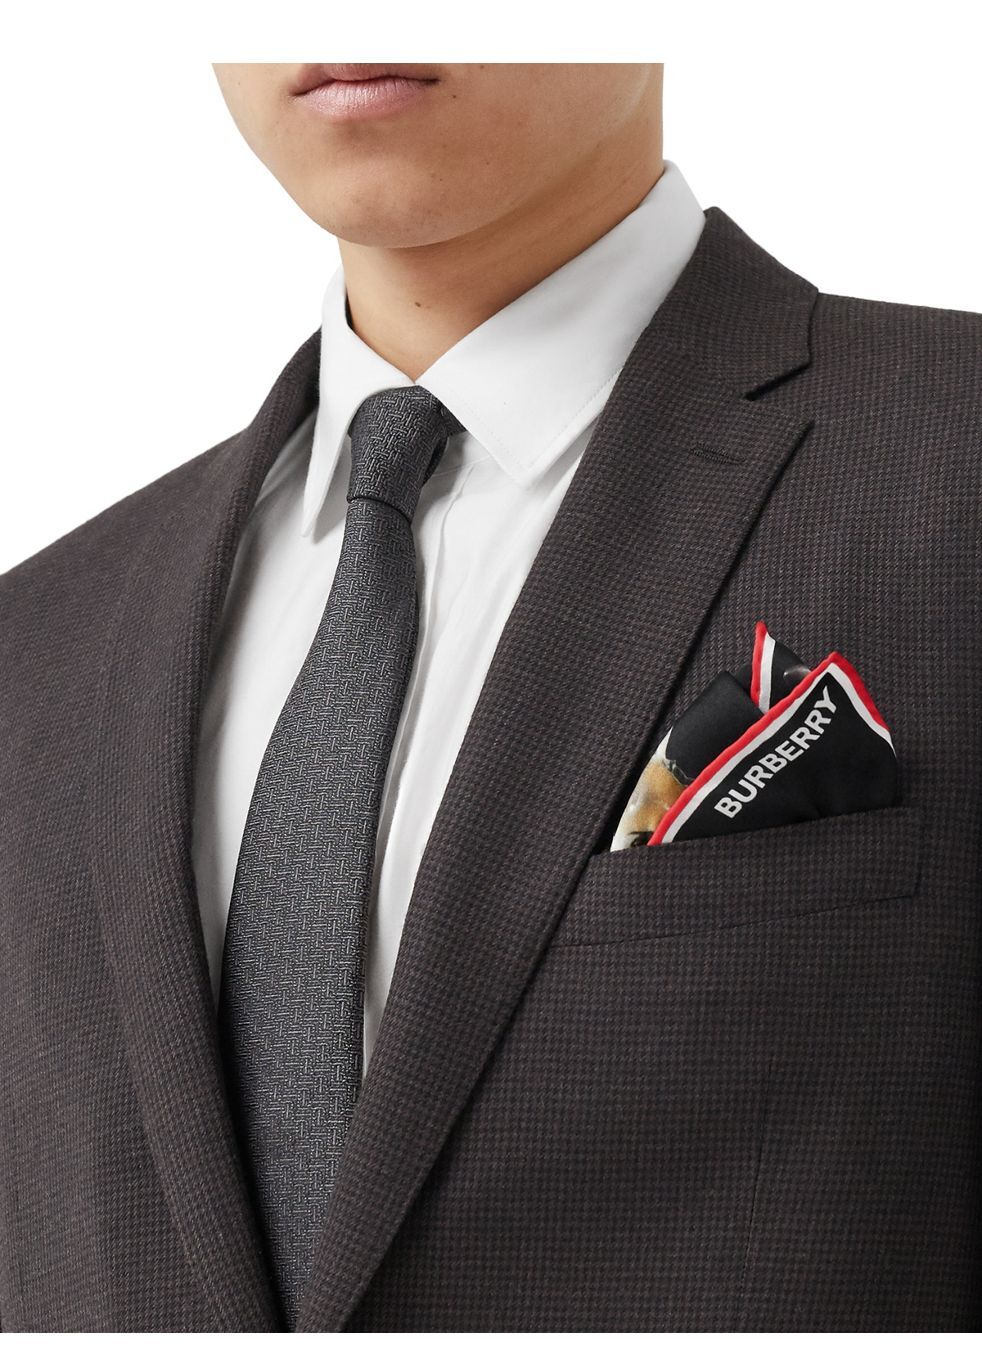 burberry tie and pocket square